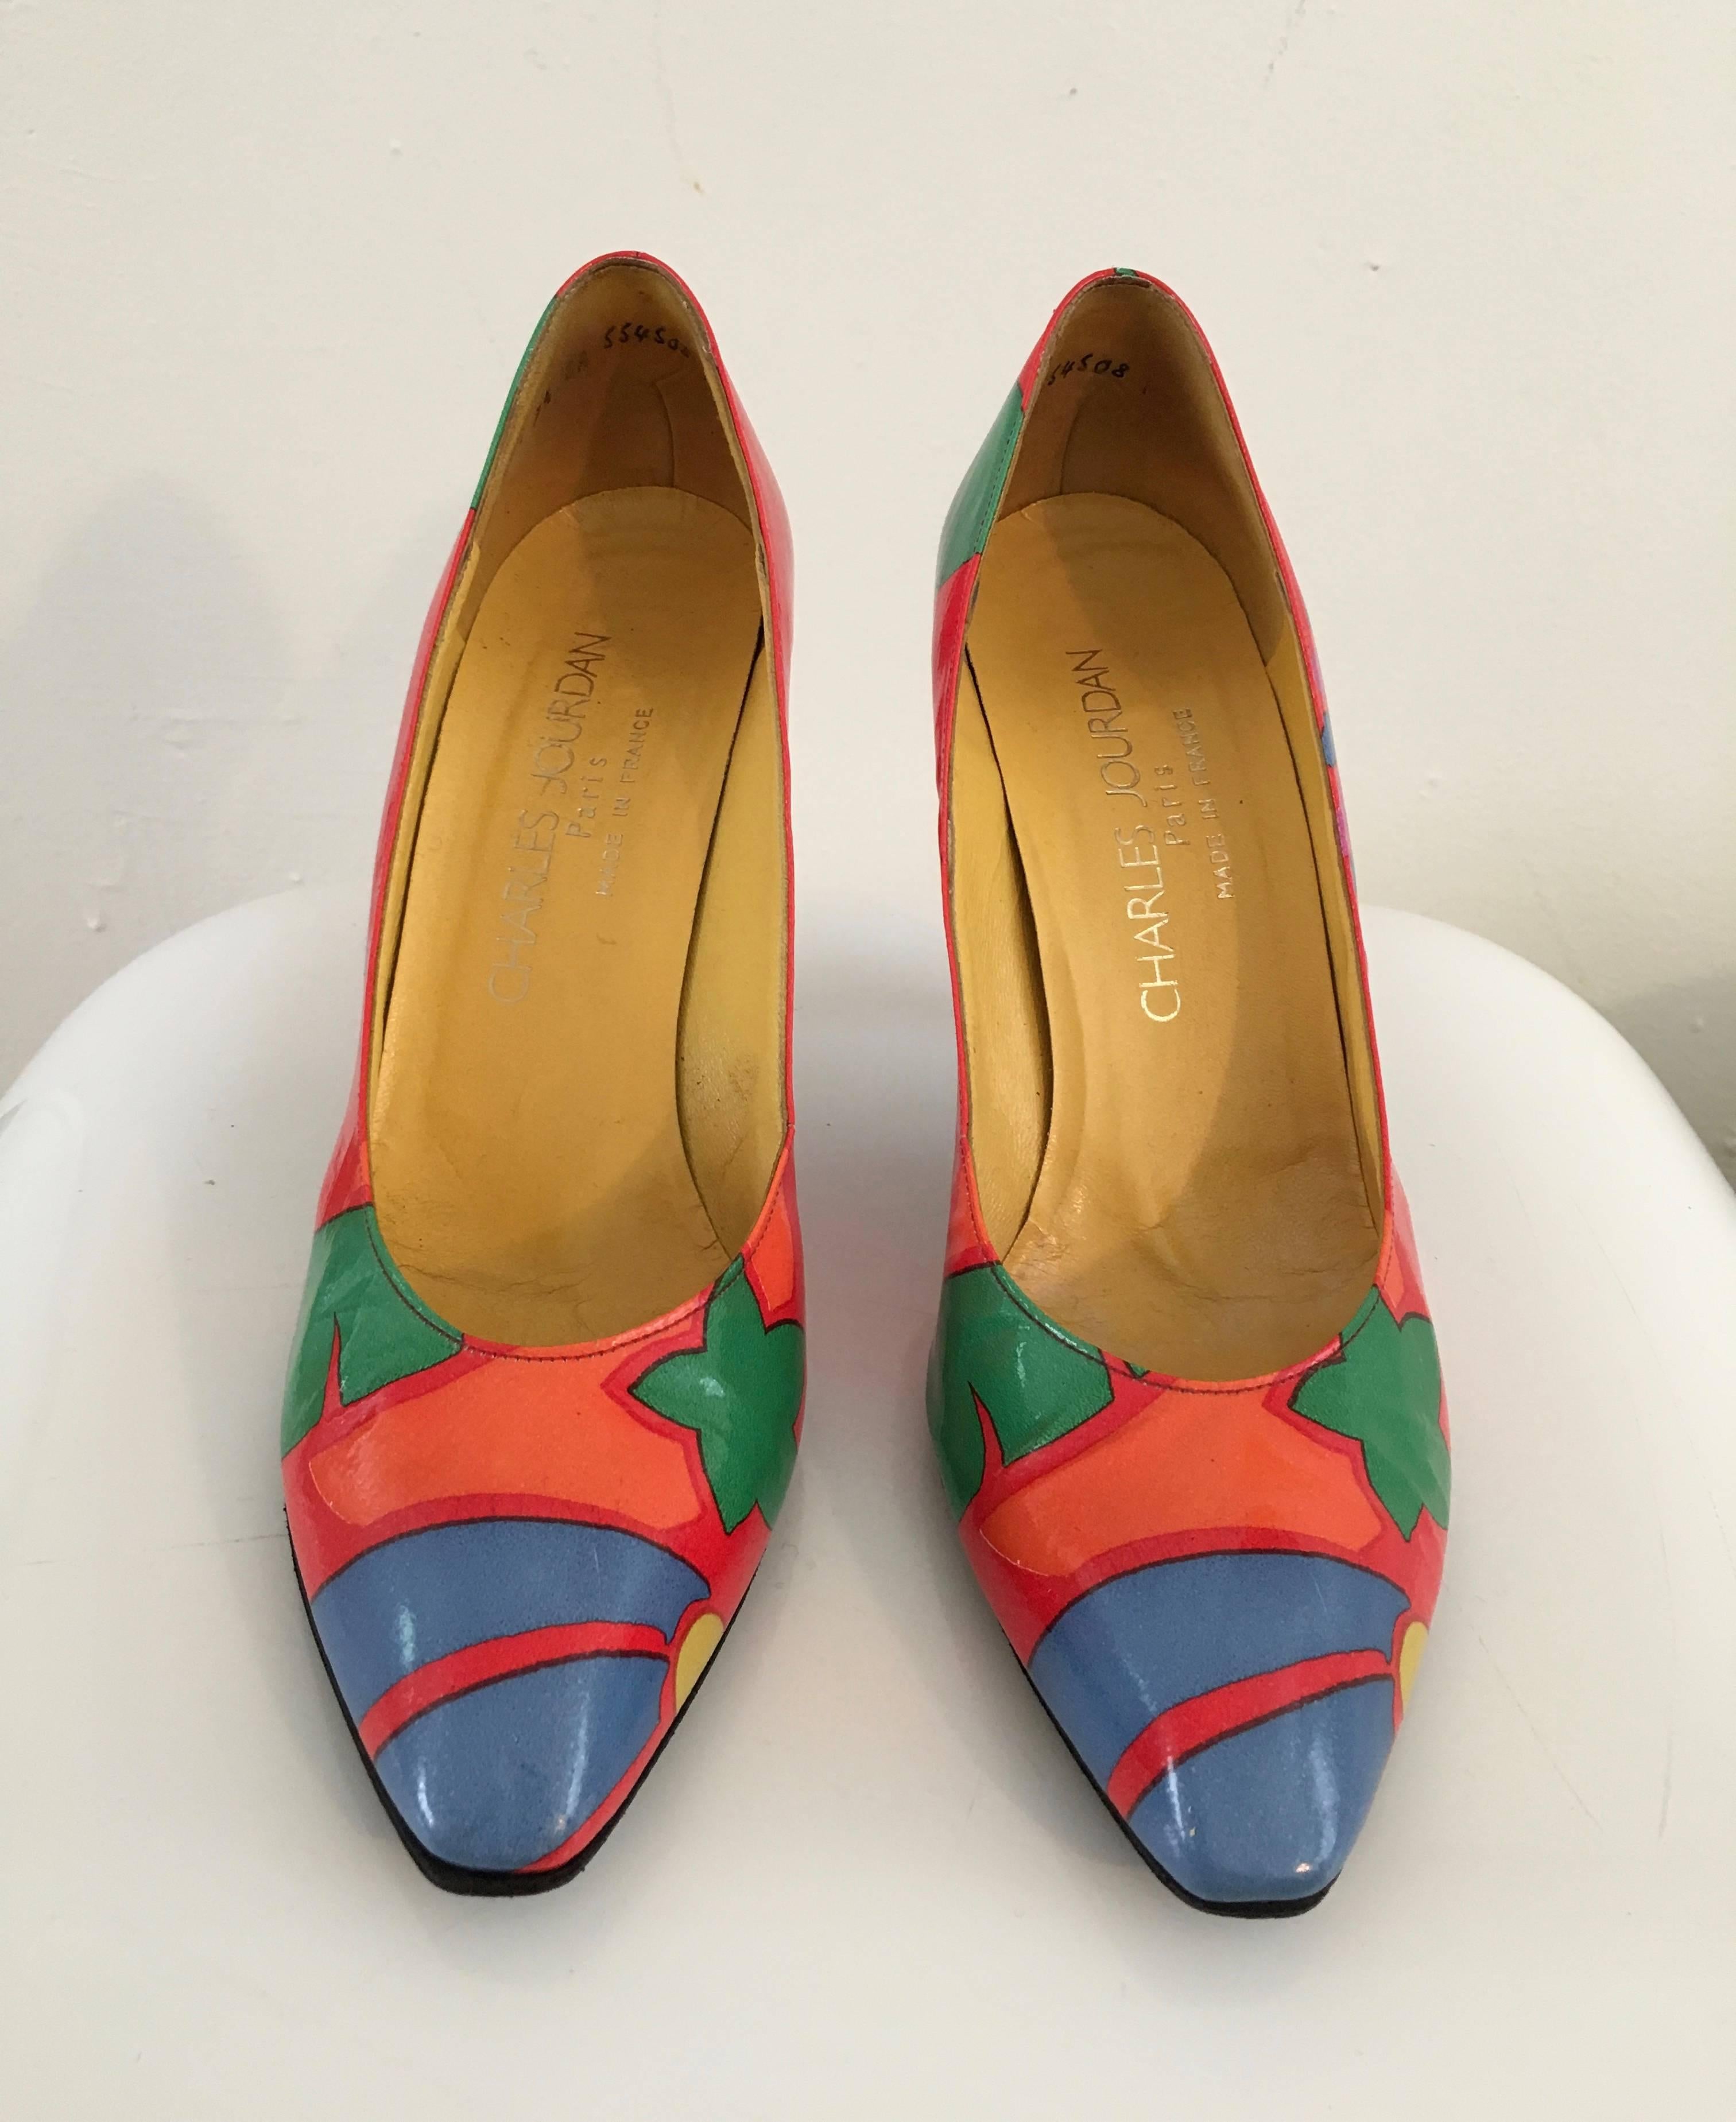 Charles Jourdan Paris 1980s tropical leaf & flower bright pattern leather pumps are a size 7.5 2A.  Shoes made in France.  These are gorgeous pumps perfect for Spring & Summer.  These heels remind me of something you would see walking South Beach